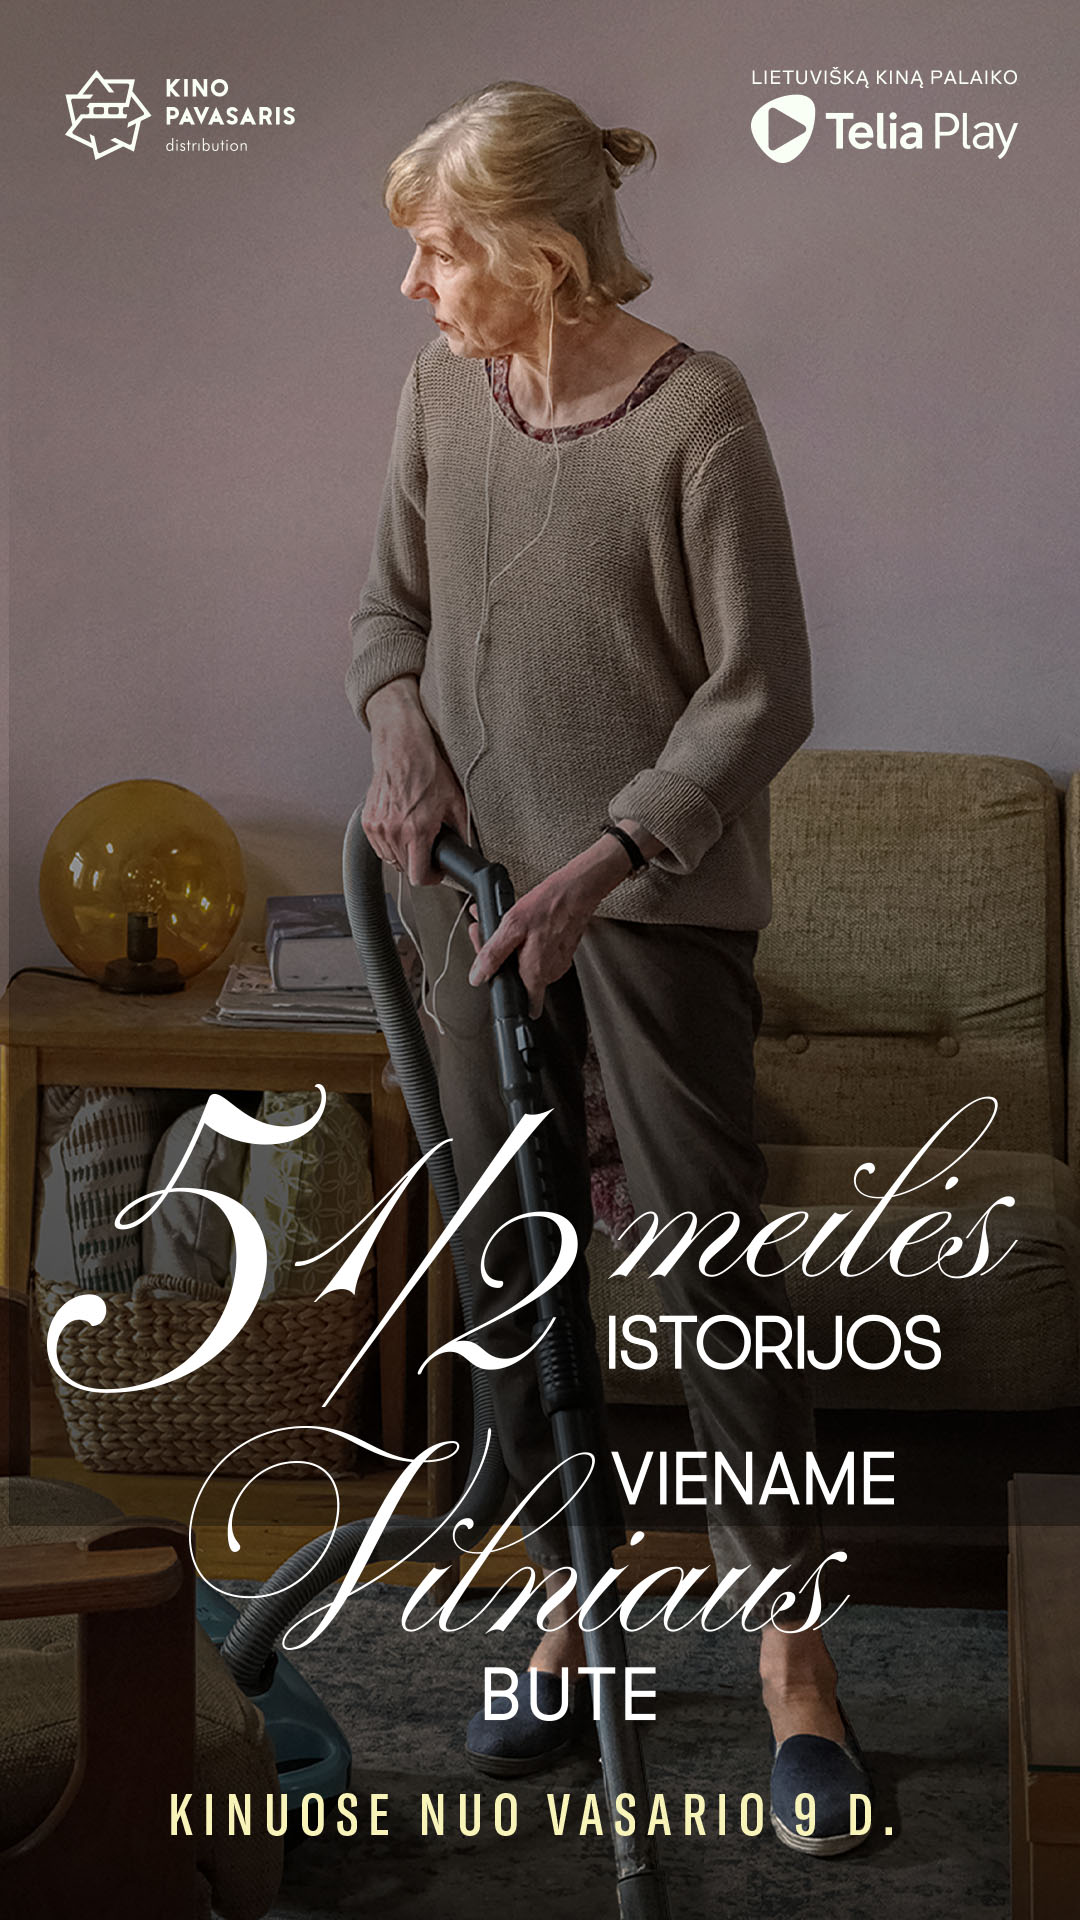 5 ½ meilės istorijos viename Vilniaus bute (Five and a Half Love Stories in an Apartment in Vilnius, Lithuania)